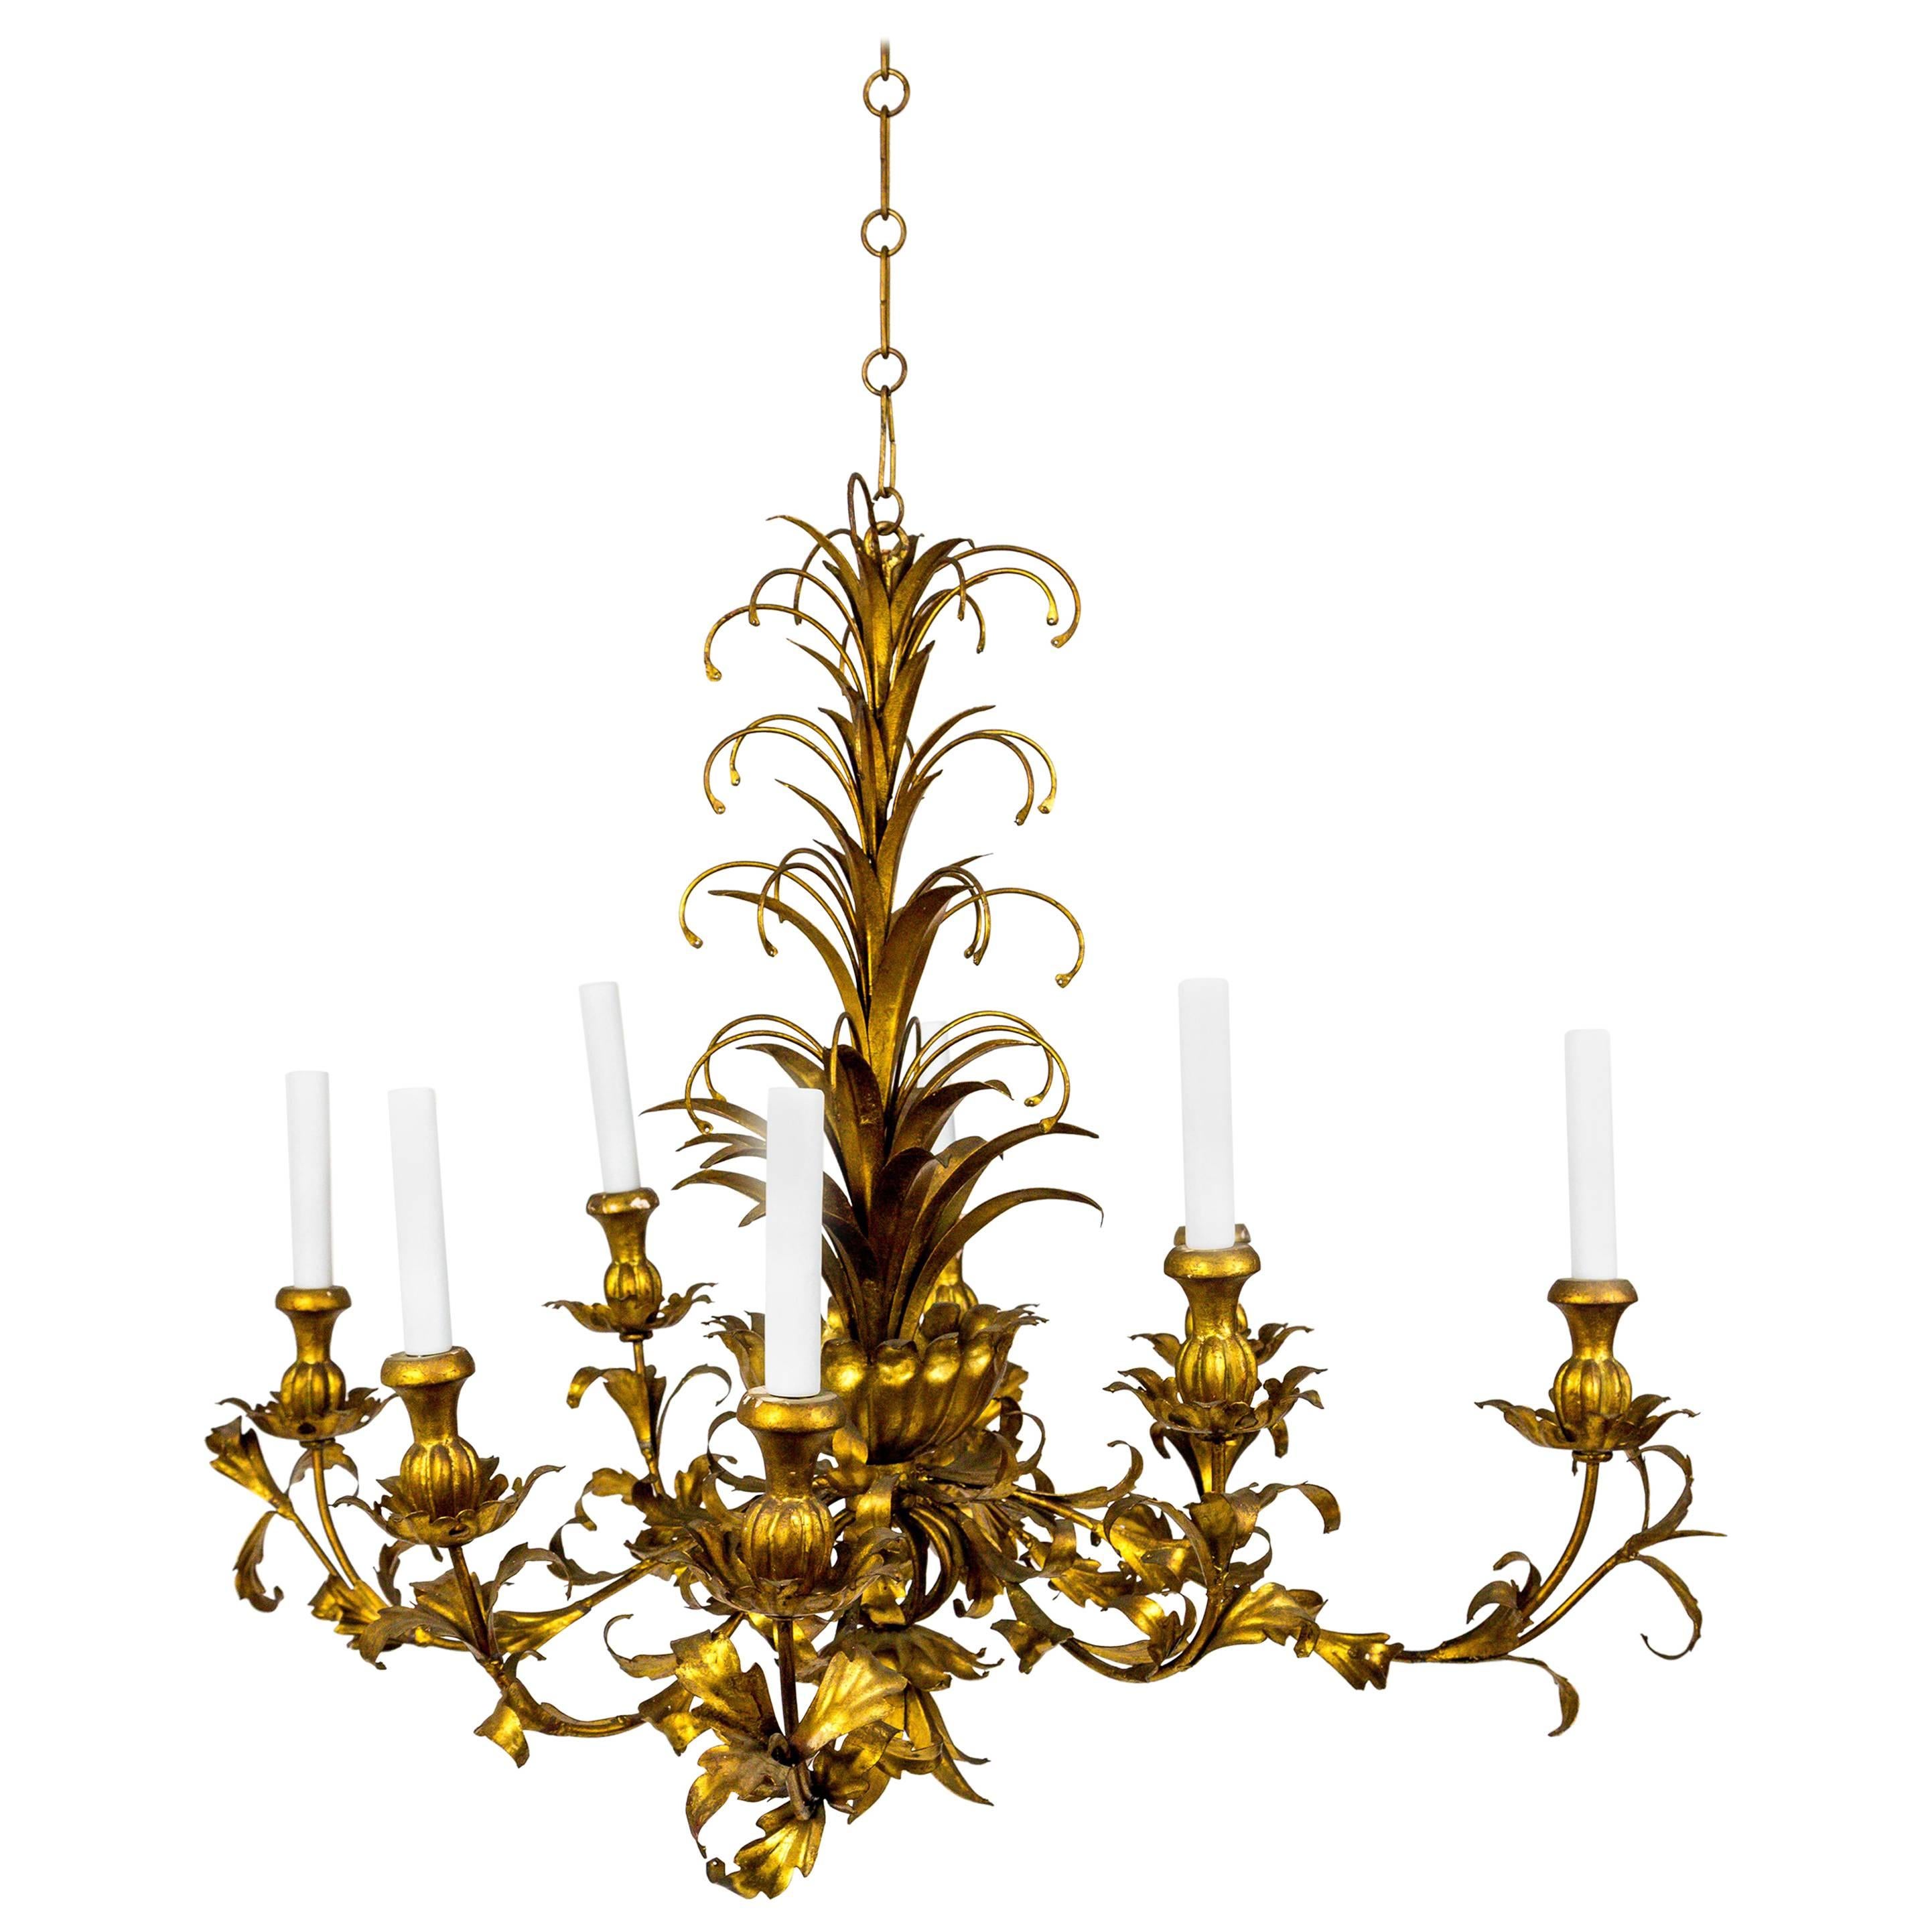 We have two of these opulent, gilt metal, Hollywood Regency chandeliers. The finish has a rich, gleaming tone, and the unique shape changes from various points of view. From below, a rectangular shape is noticeable as four of the eight arms stretch